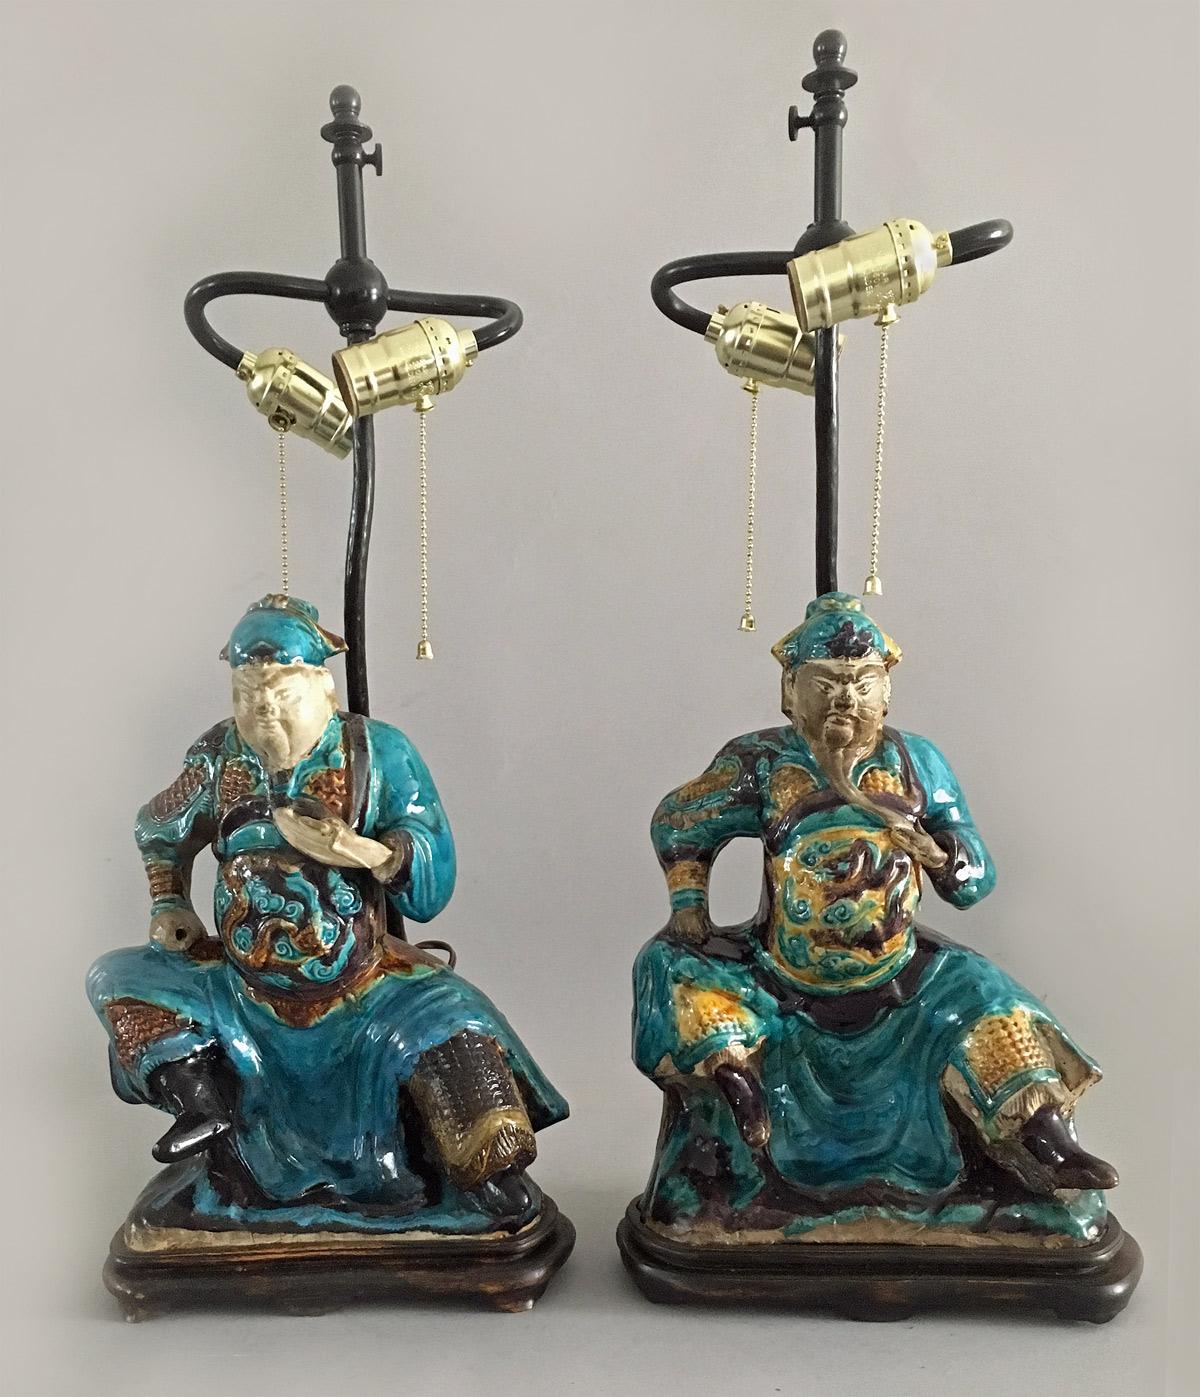 Pair of Chinese Shiwan pottery polychrome glazed figures of warriors, holding their beards, decorated in colors of turquoise, yellow and brown, mounted on wooden stands as lamps. These were originally used as roof tiles. They have brass adjustable